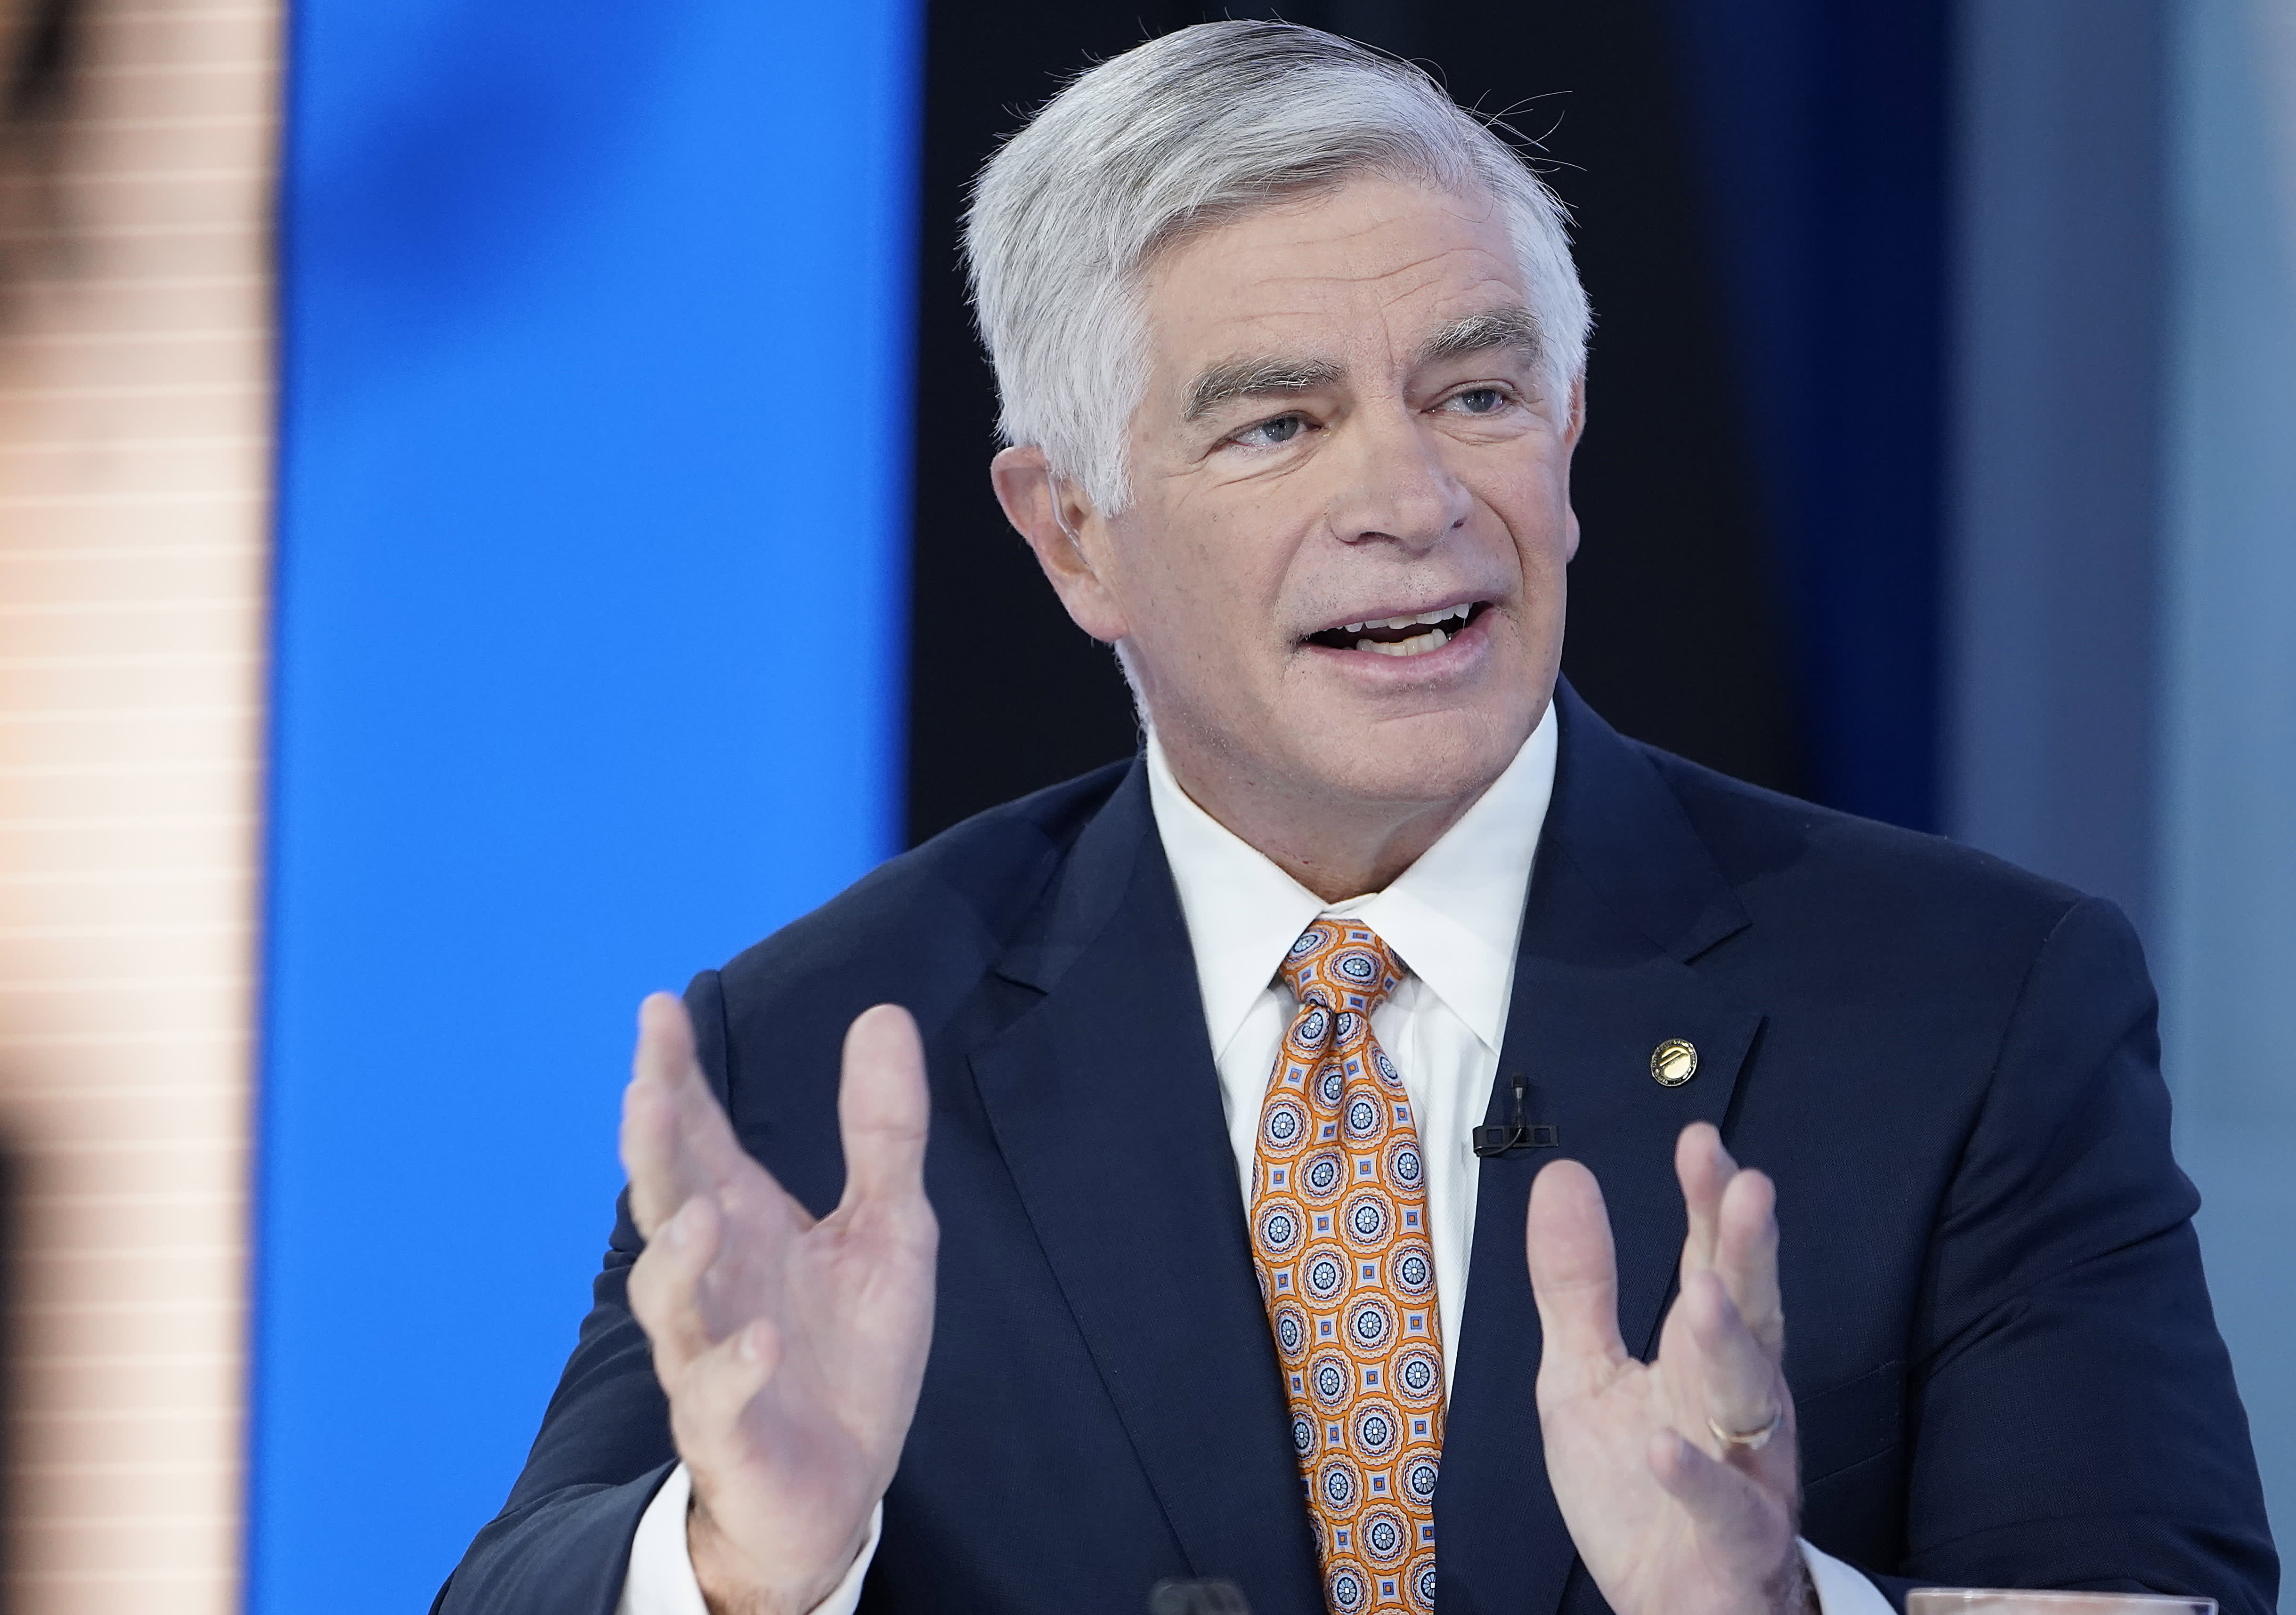 Philadelphia Federal Reserve President Patrick Harker said he foresees three or four interest rate hikes this year as likely to fight inflation.